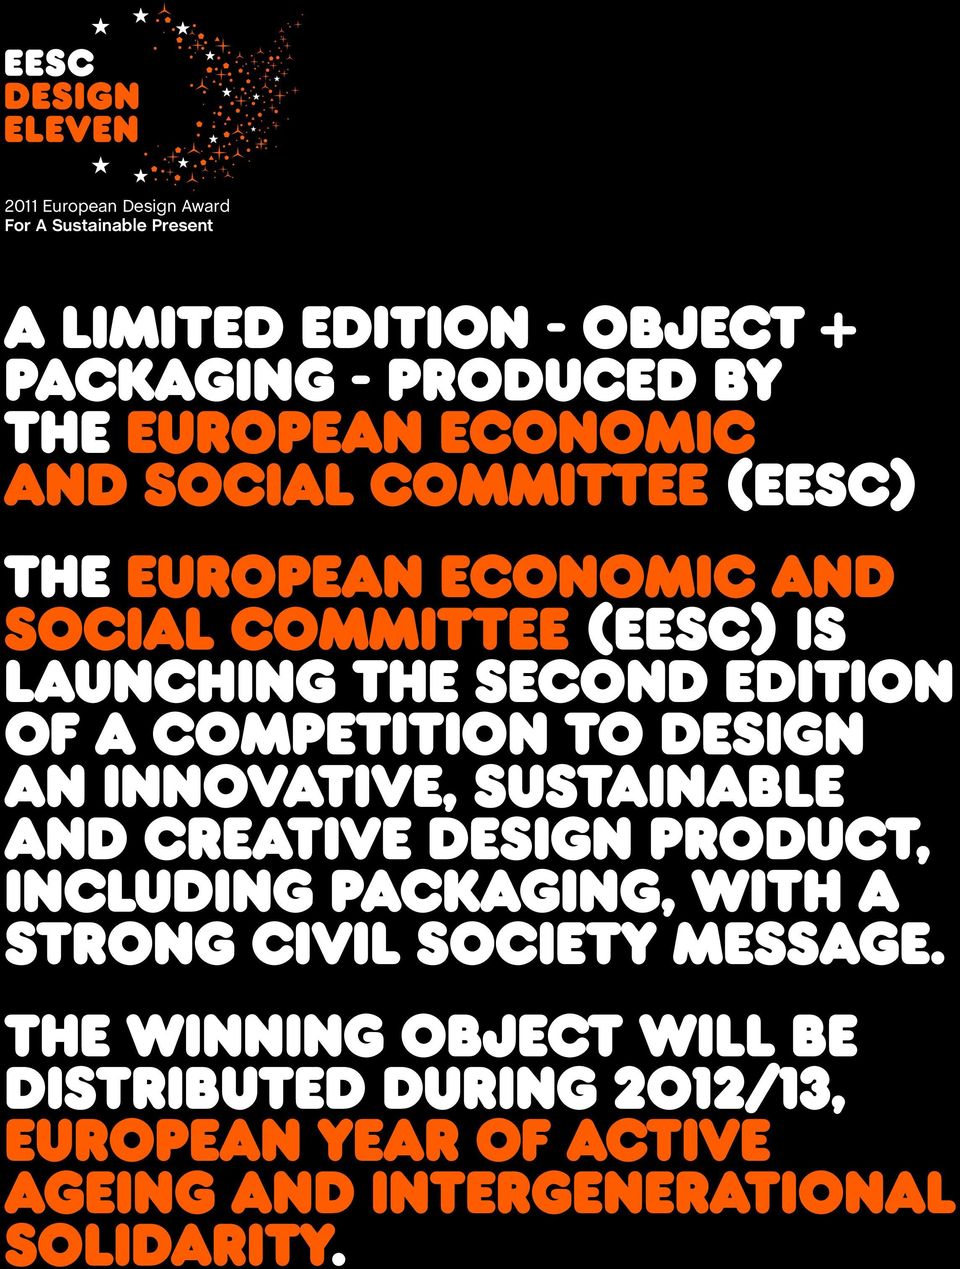 competition to design an innovative, sustainable and creative design product, including packaging, with a strong civil